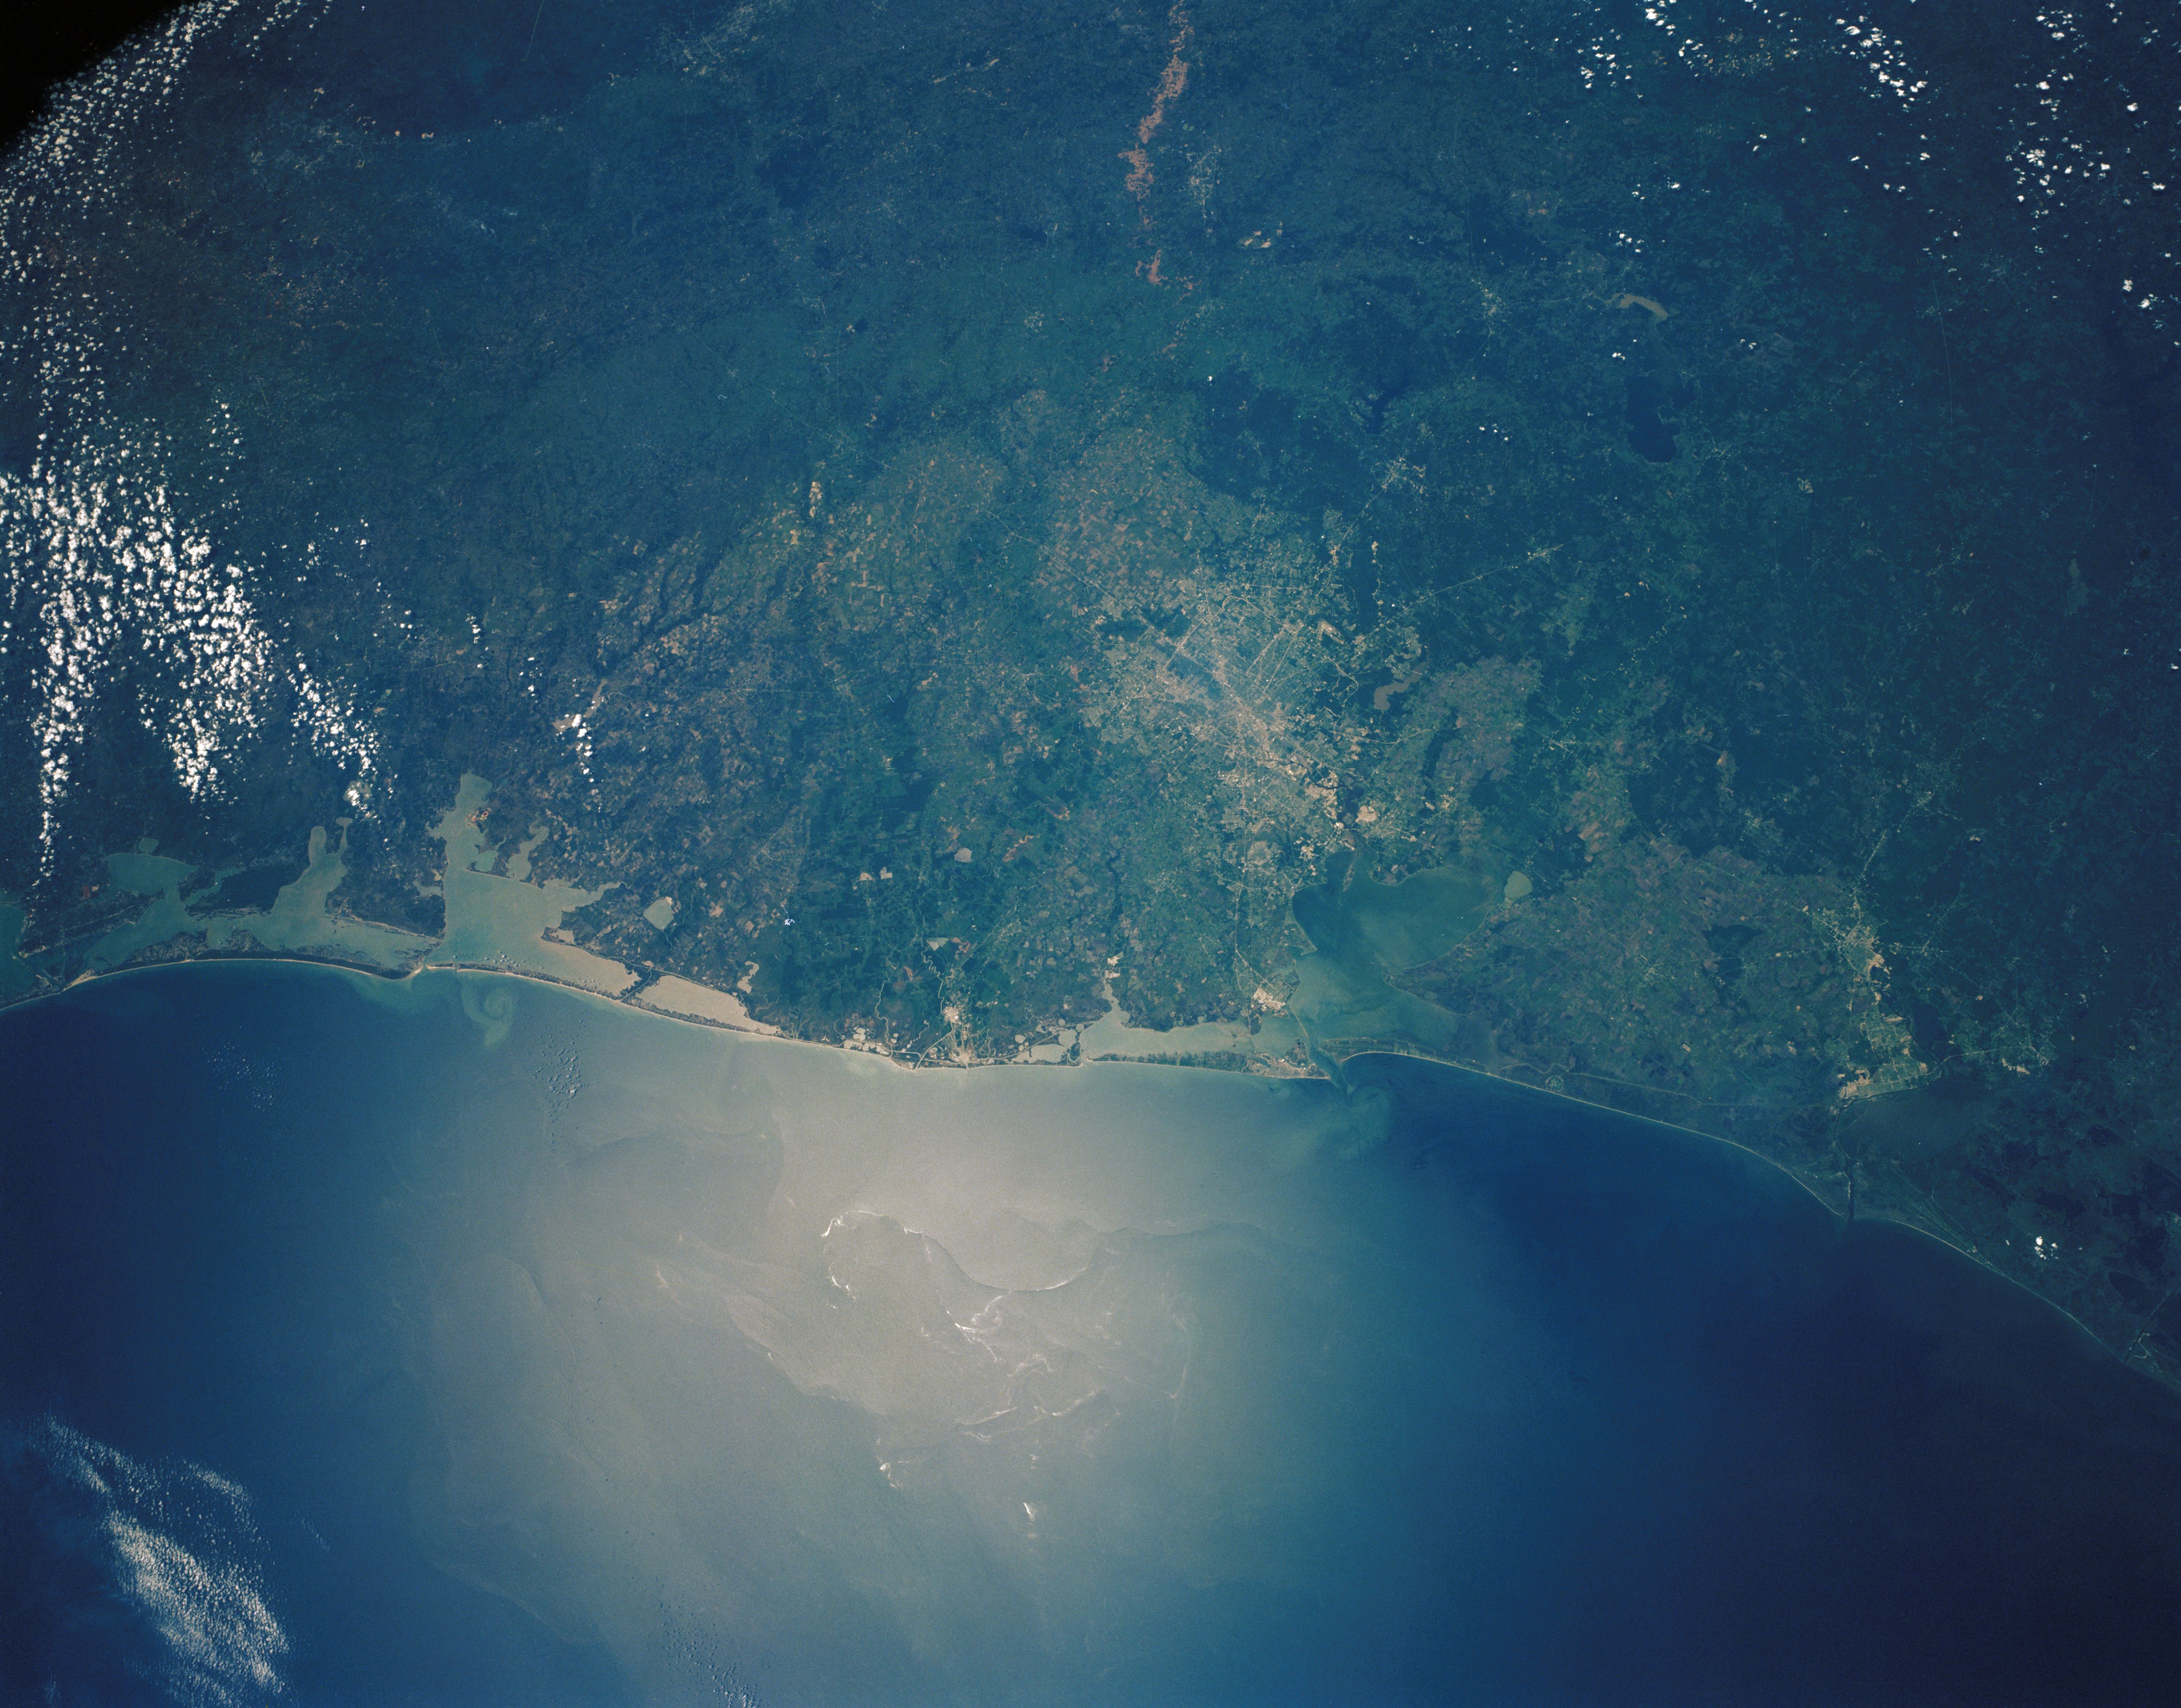 STS-30 crew Earth observation photograph of the Texas Gulf Coast including Houston